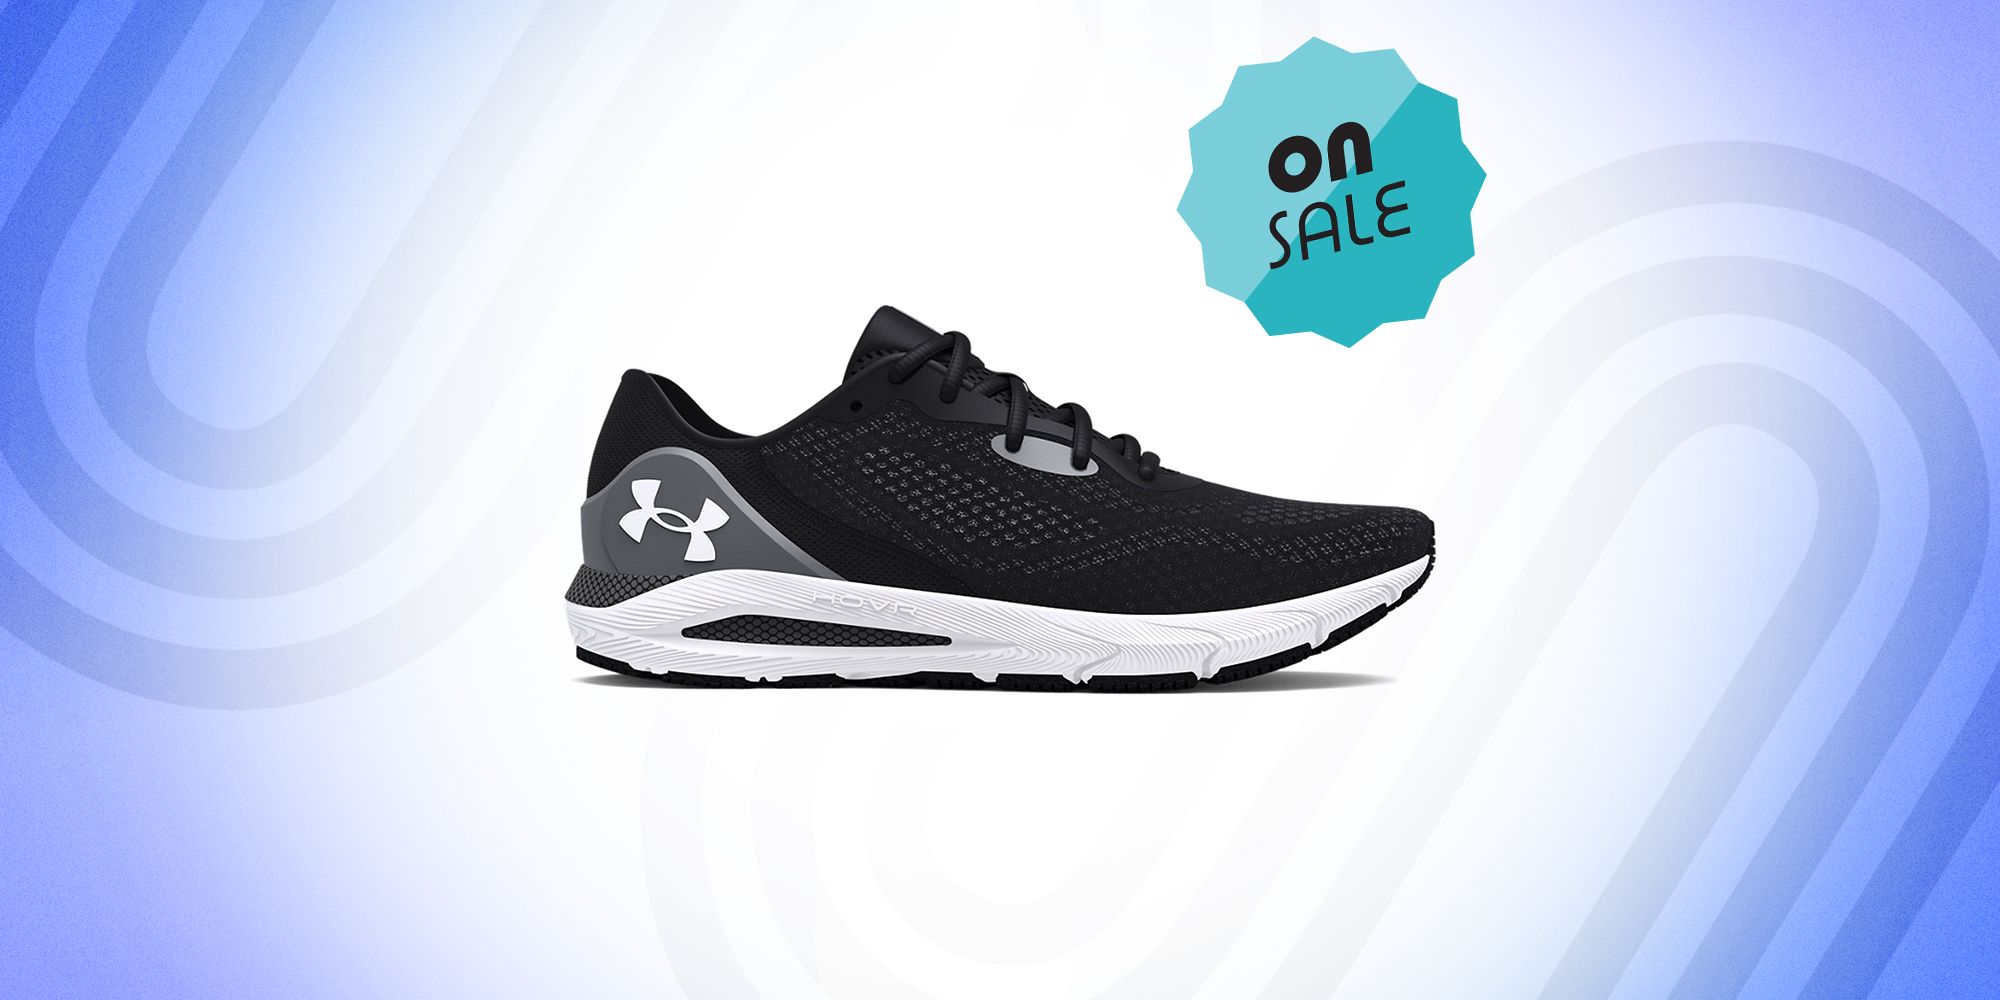 officieel Dezelfde erectie Get Up to 50% Off Under Armour Outlet Items Right Now